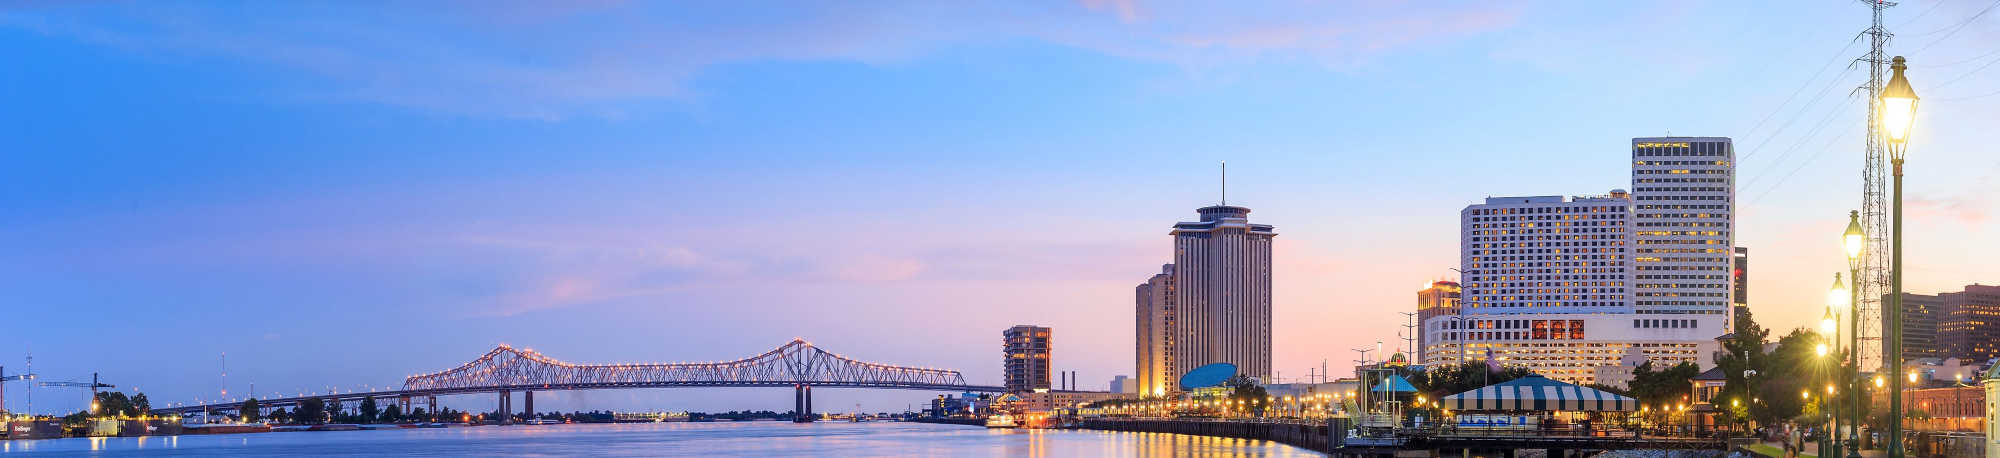 image of new orleans